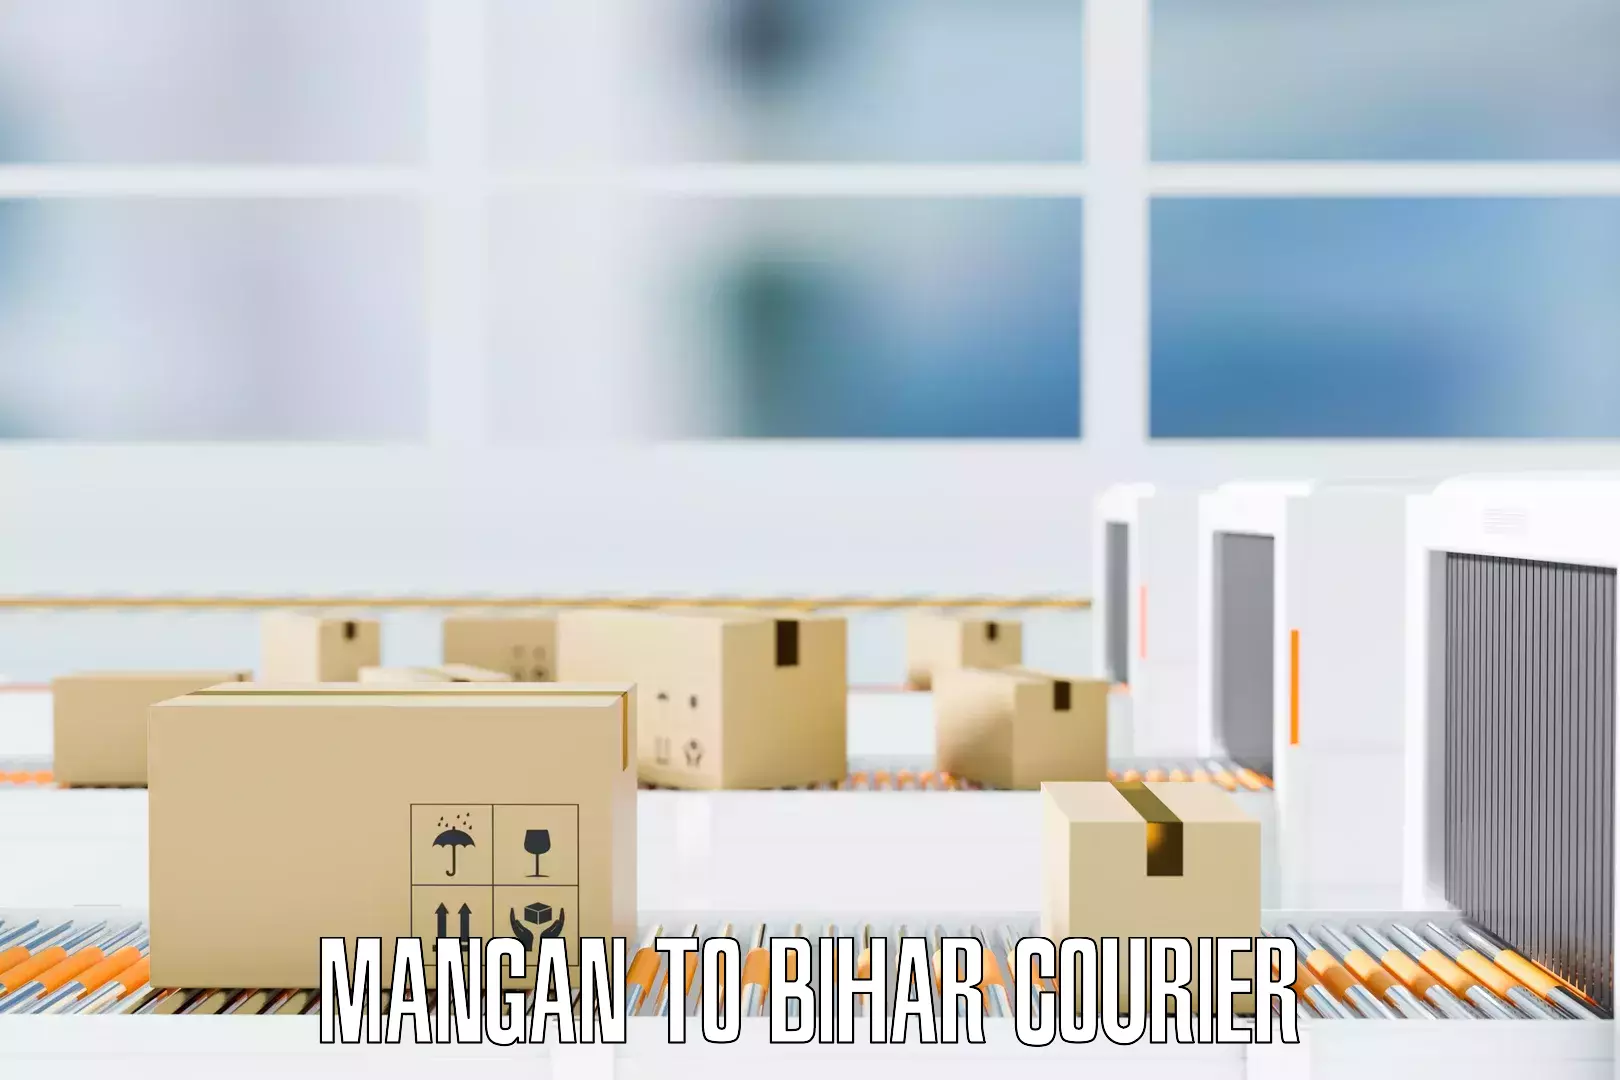 Trusted relocation experts Mangan to Barbigha